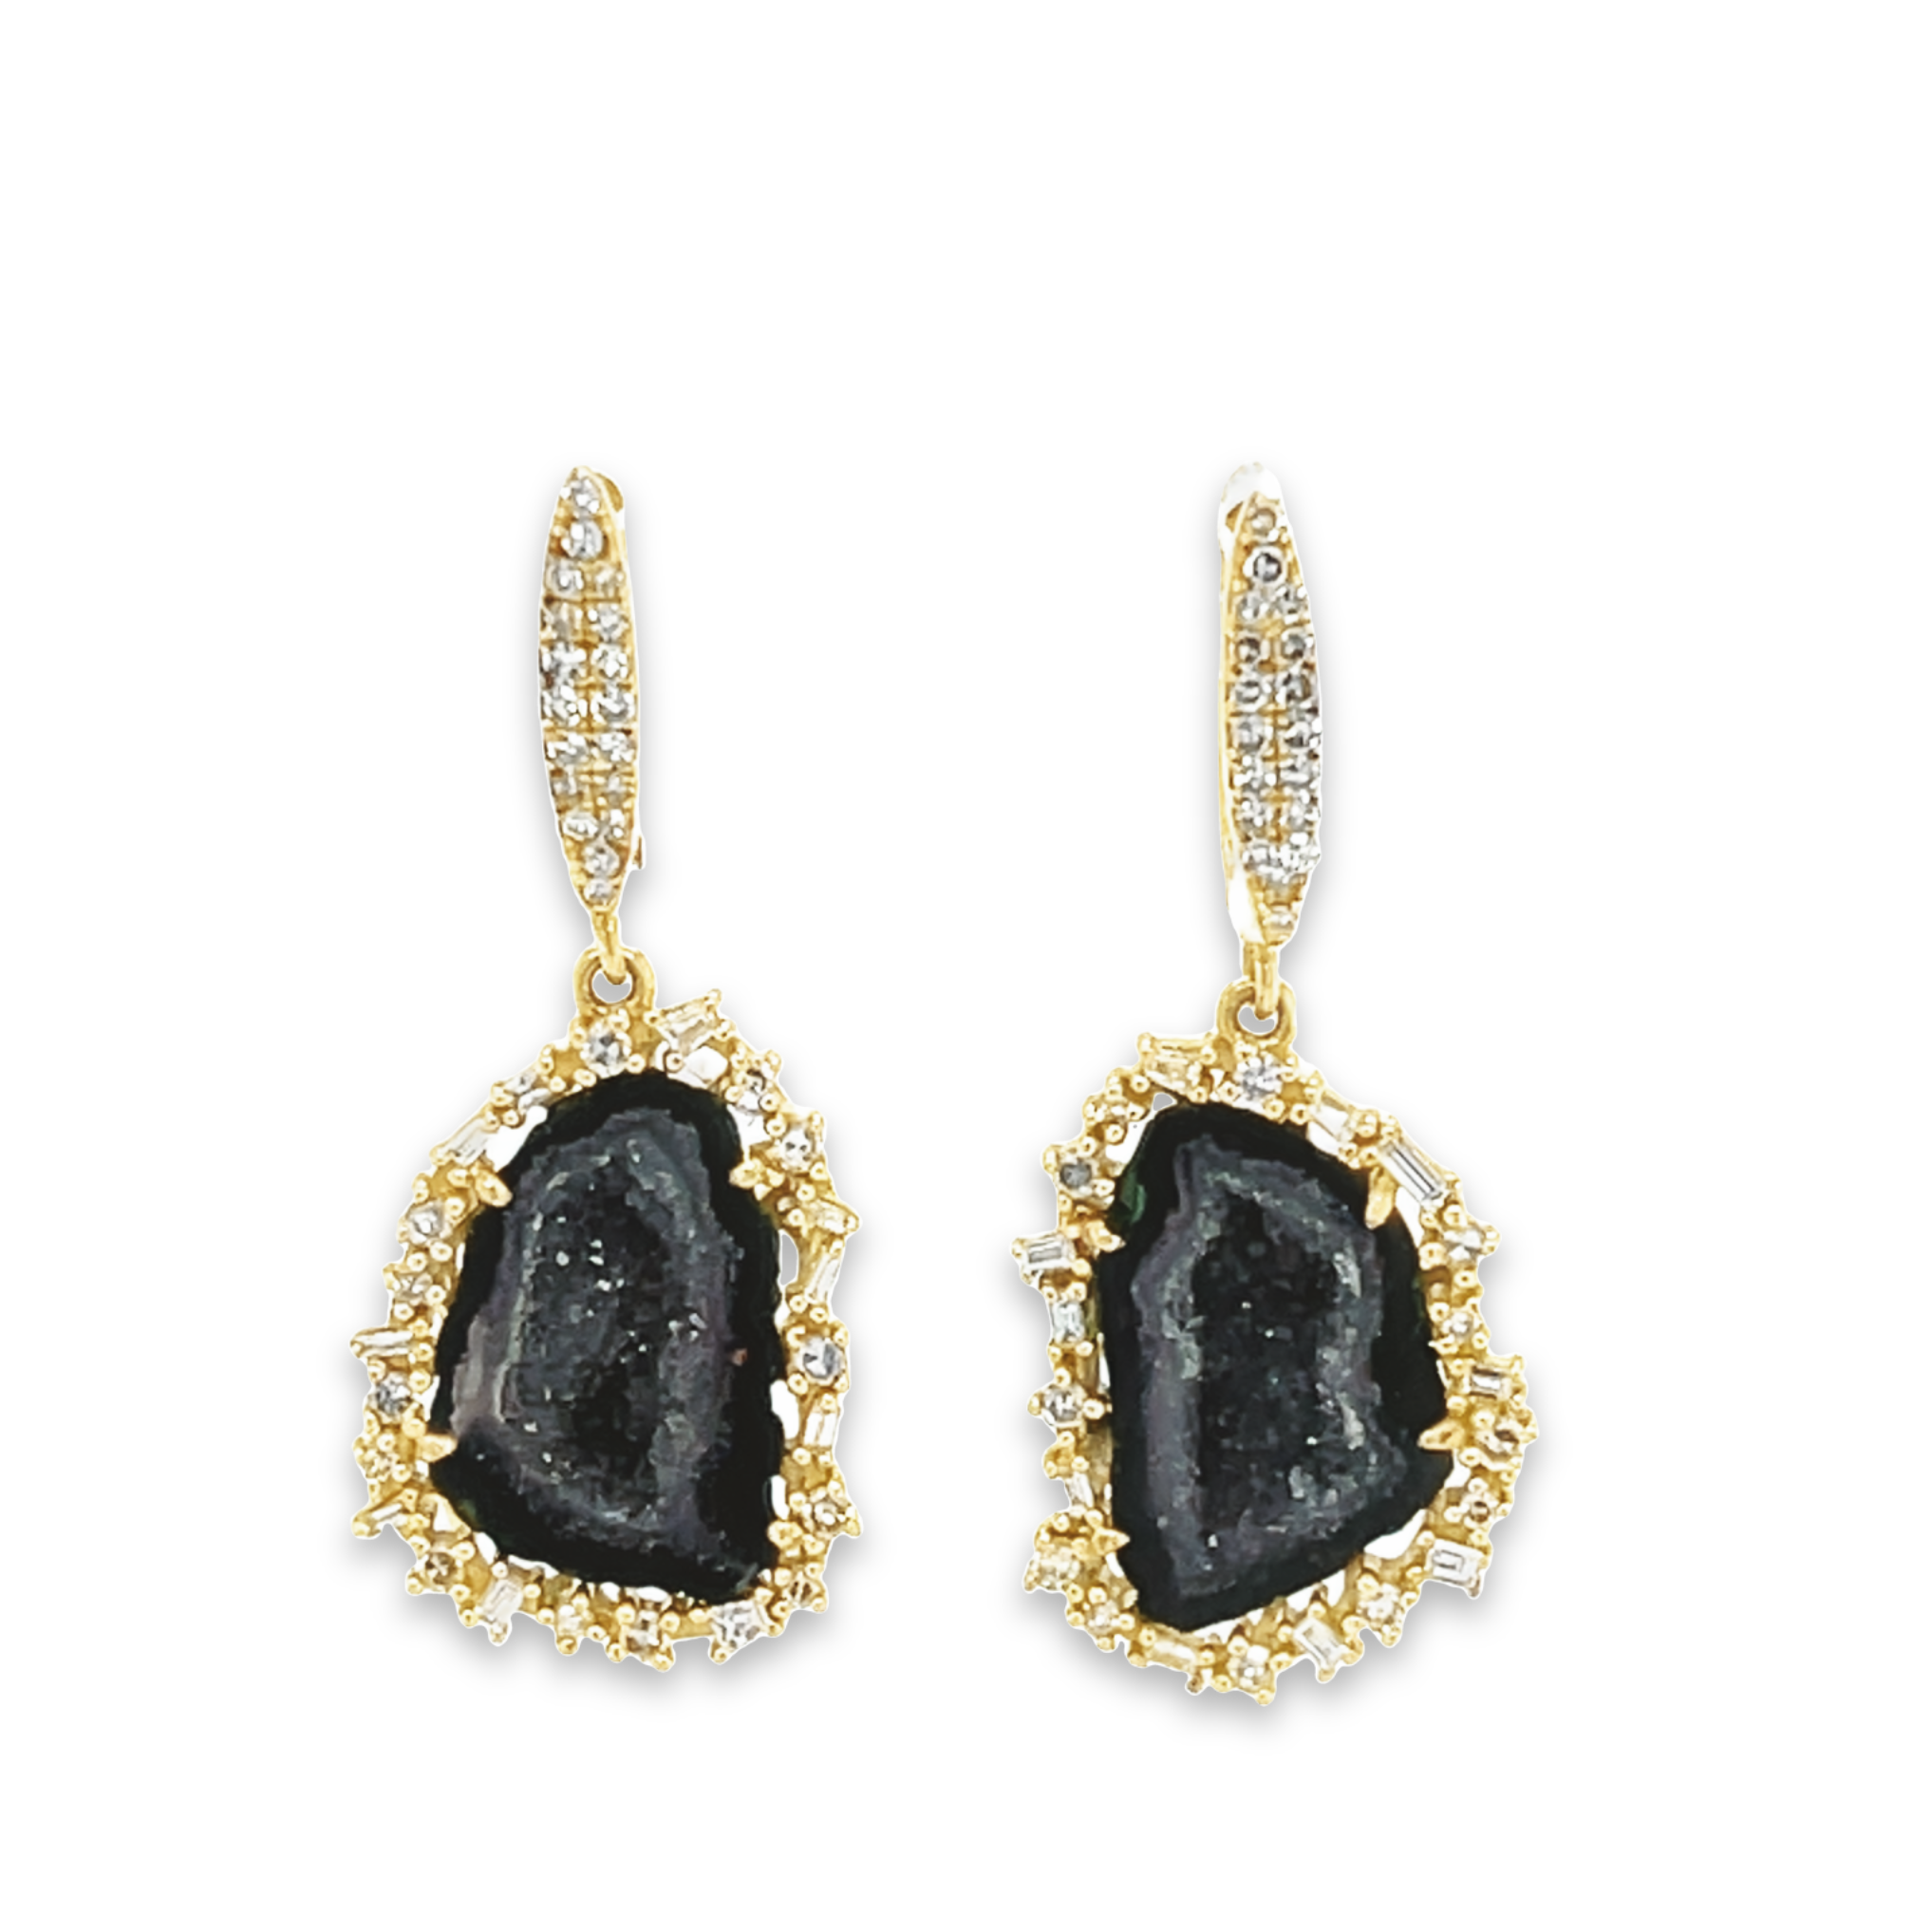 Featured image for “Sparkling Druzy Earrings”